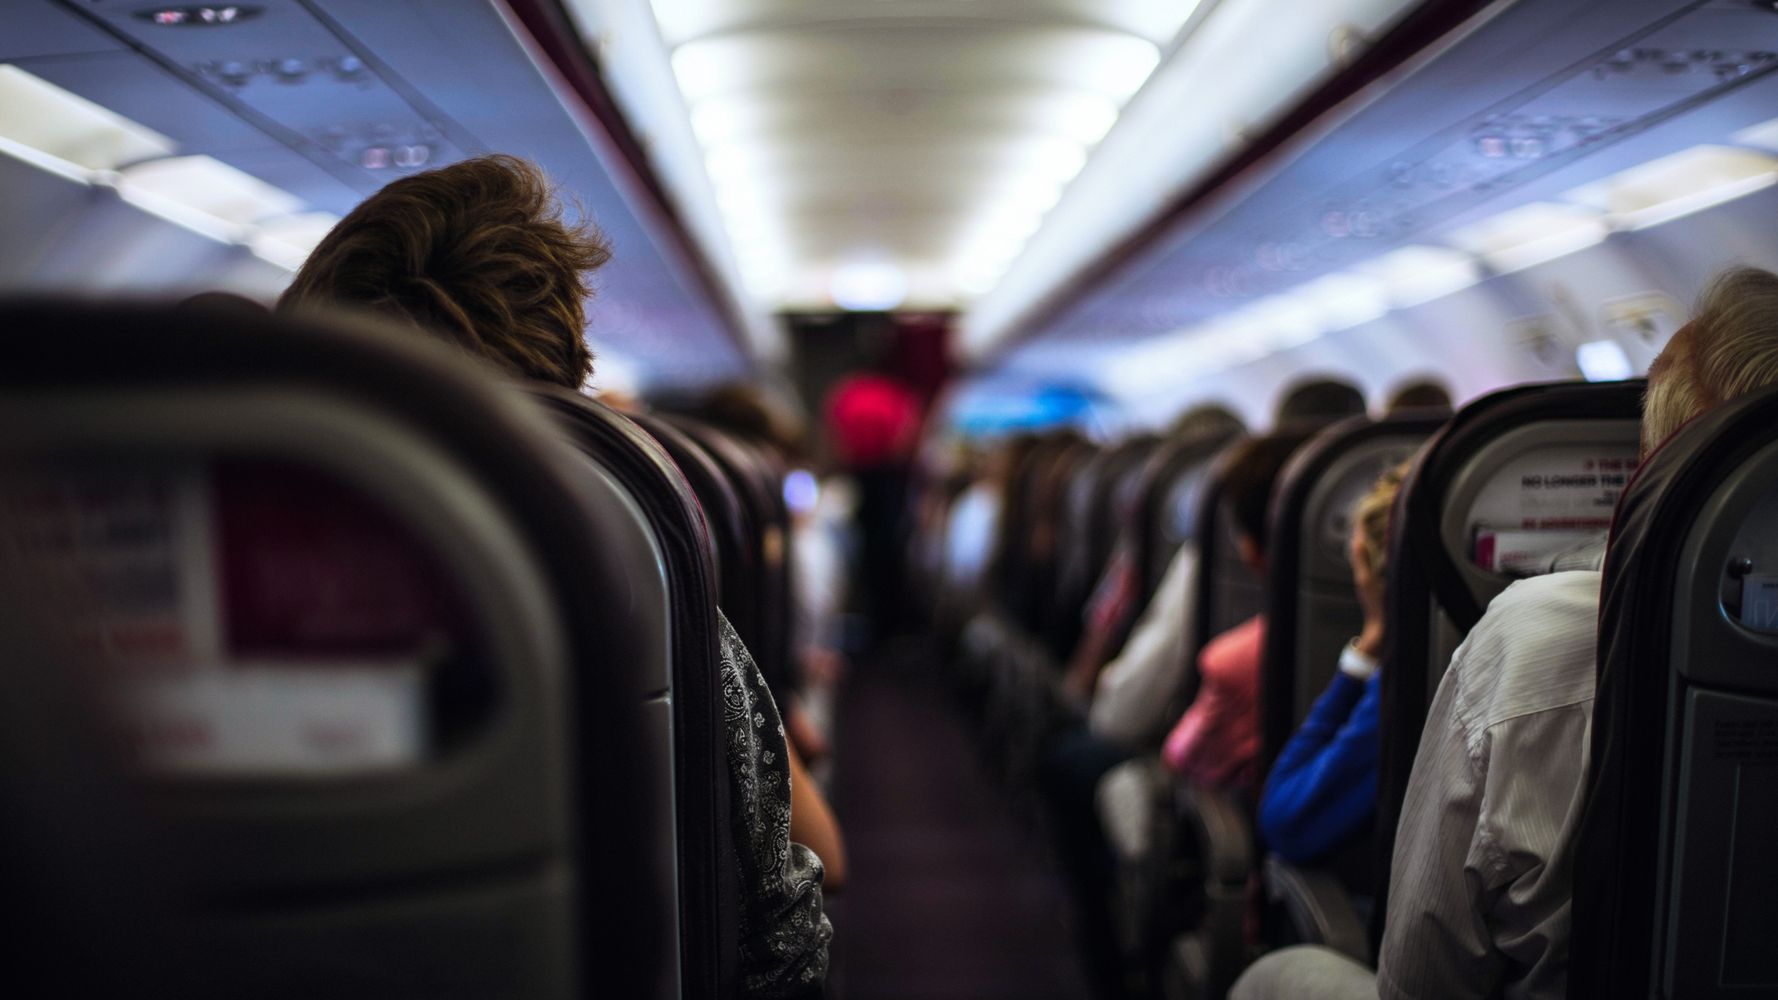 9 Simple Ways to Make Your Flying Experience Smoother, According to Flight  Attendants